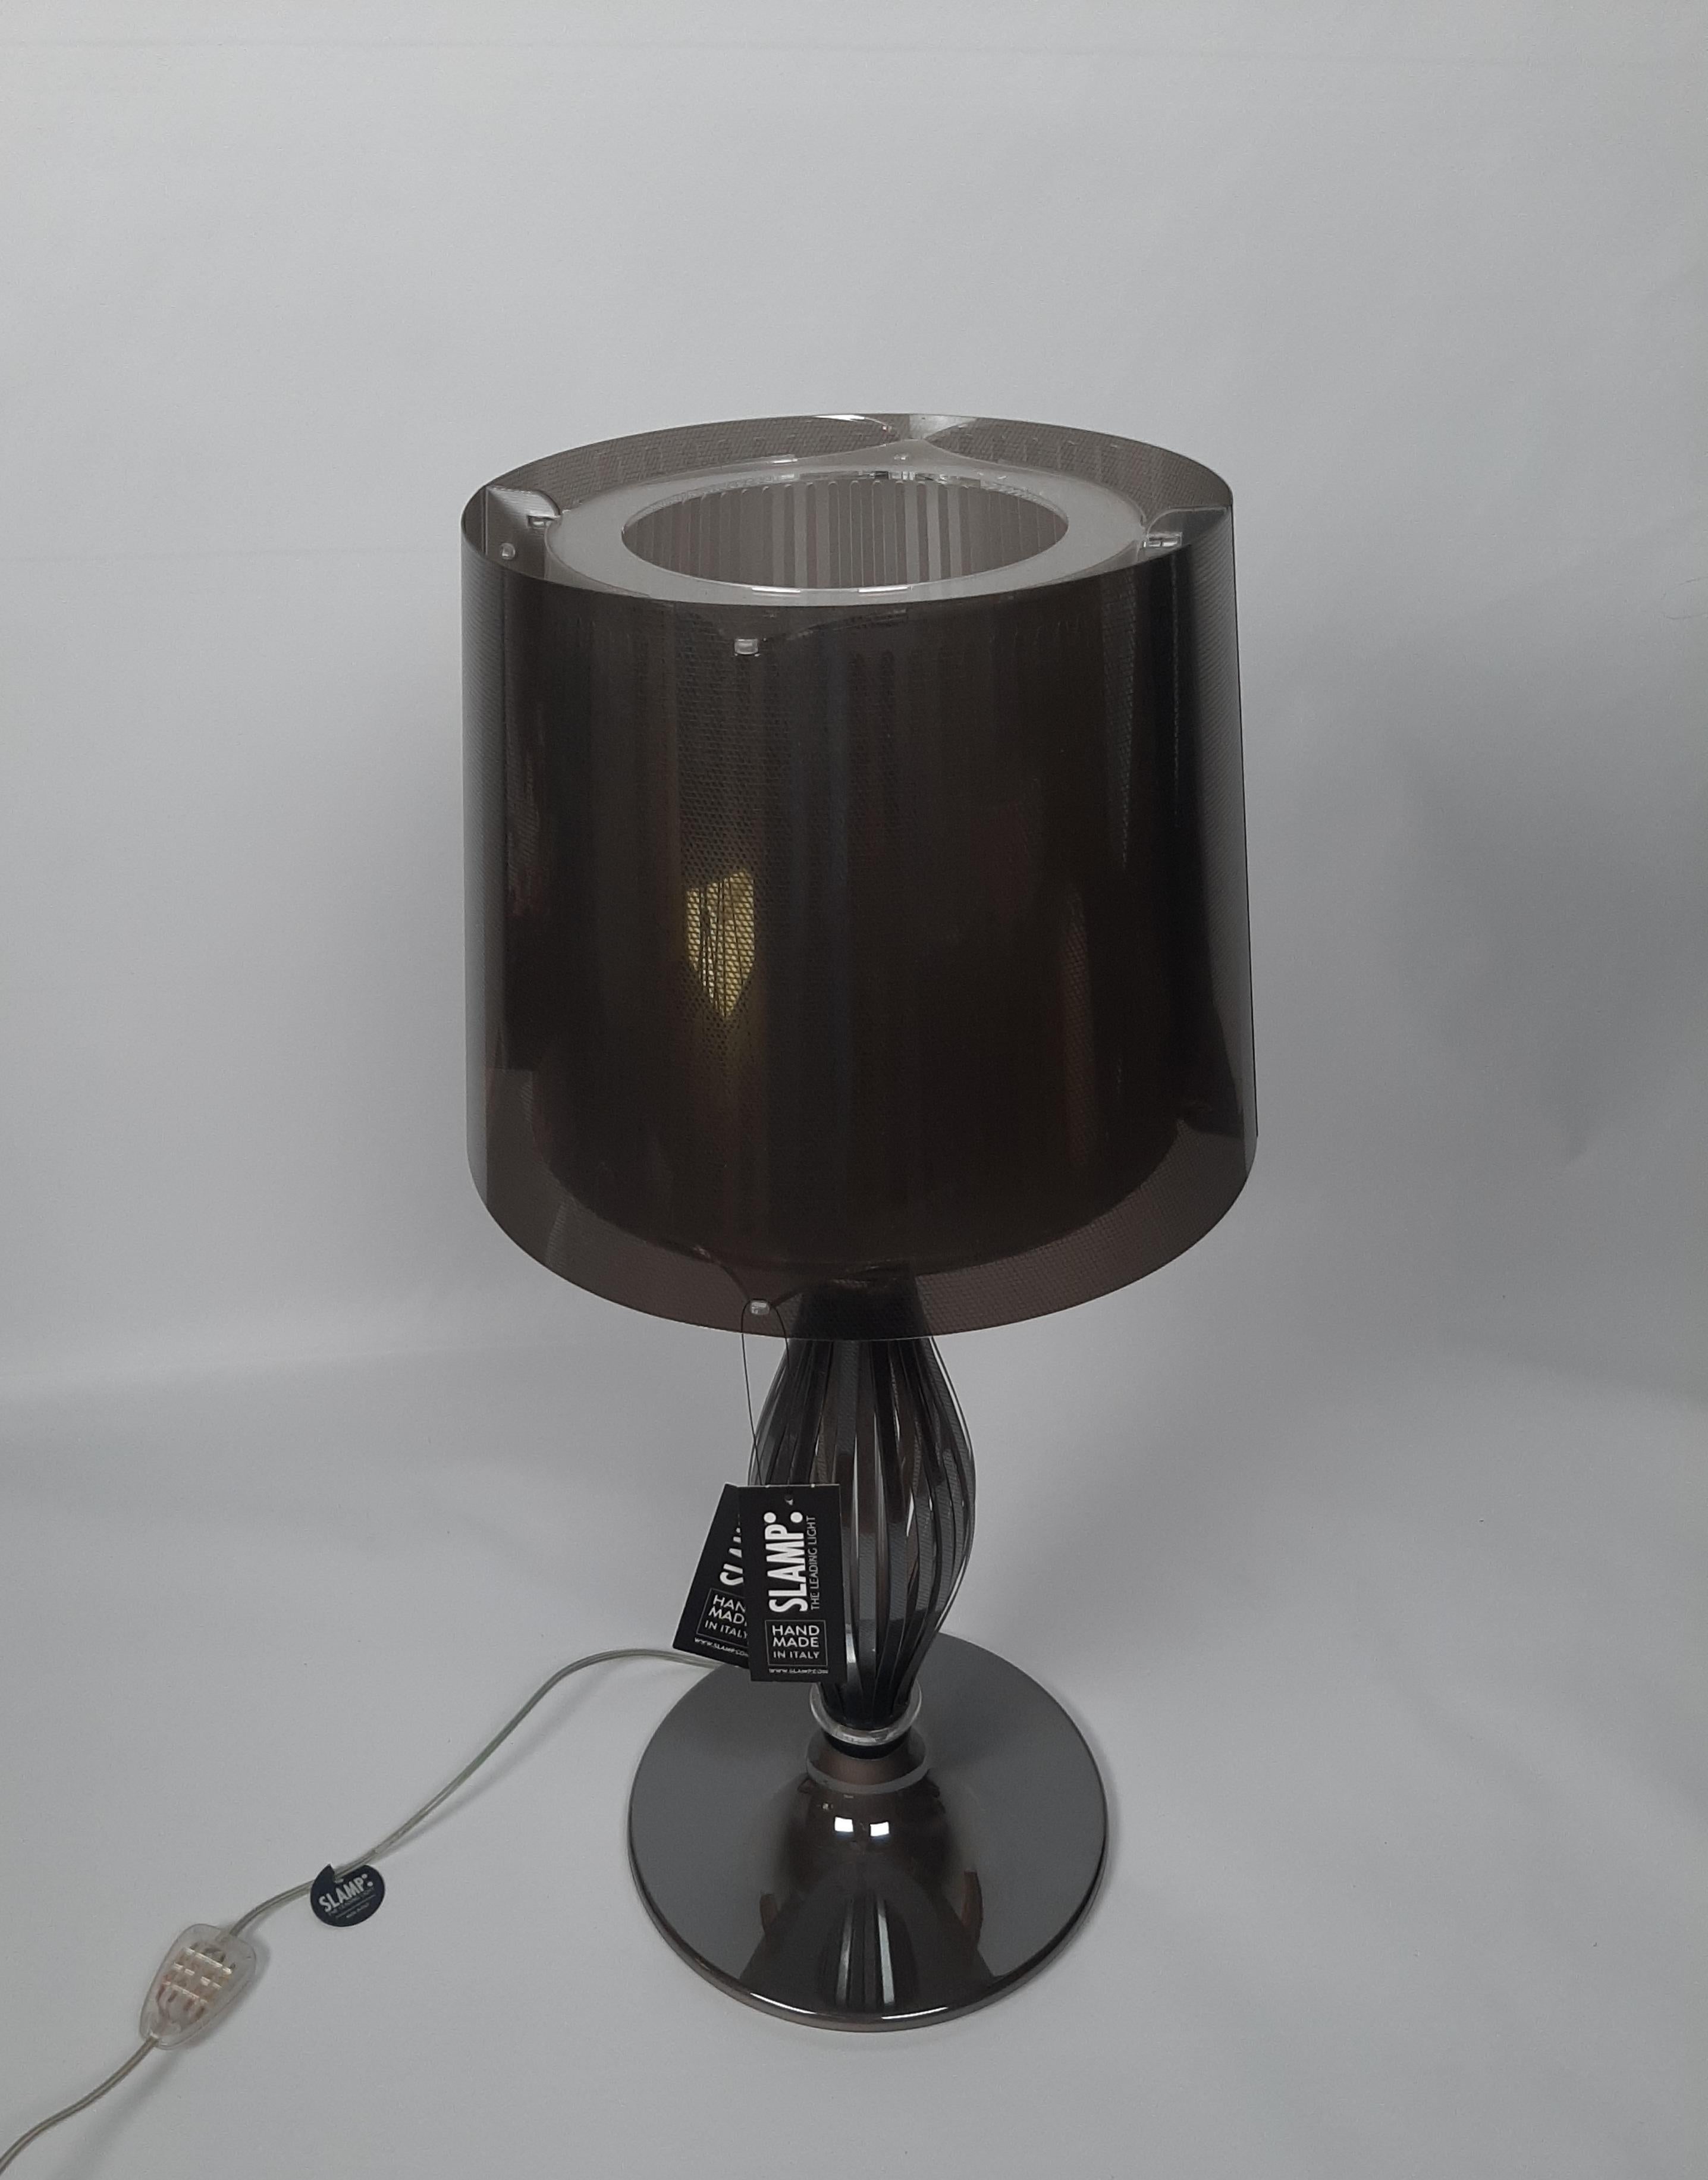 Table lamp model Liza Slamp production. Liza model lamp in gray color.
Baroque-inspired plastic table lamp that combines a design with a traditional flavor with the use of contemporary materials, technopolymers.
Designed by Elisa Giovannoni, the